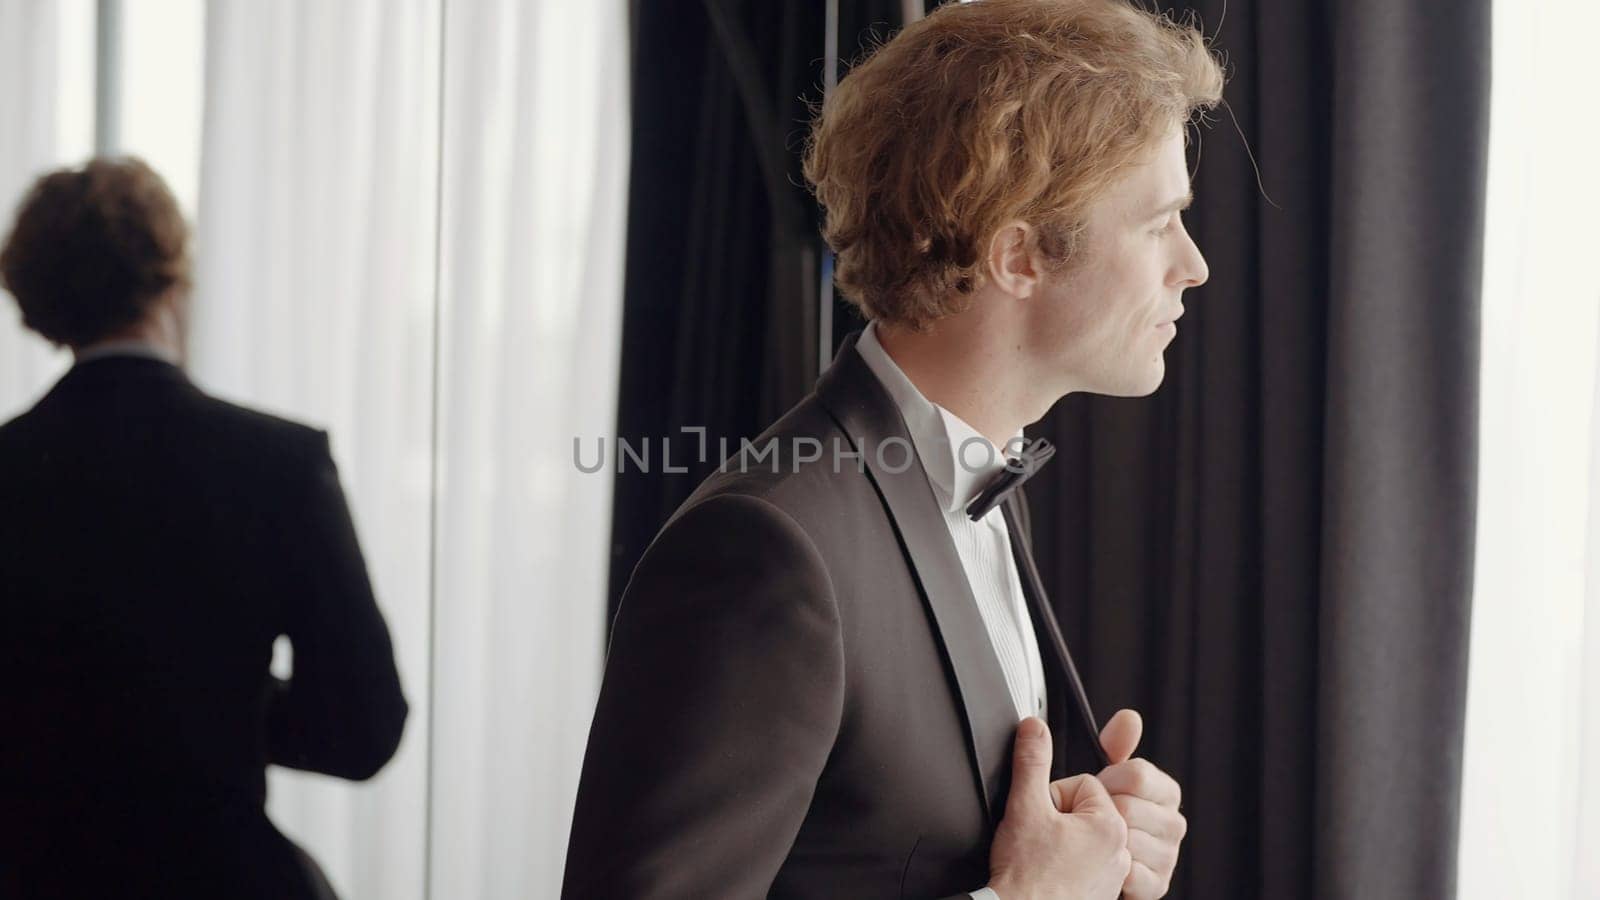 A man with a sympathetic appearance . Action . A man in an elegant suit stands next to the mirror and poses